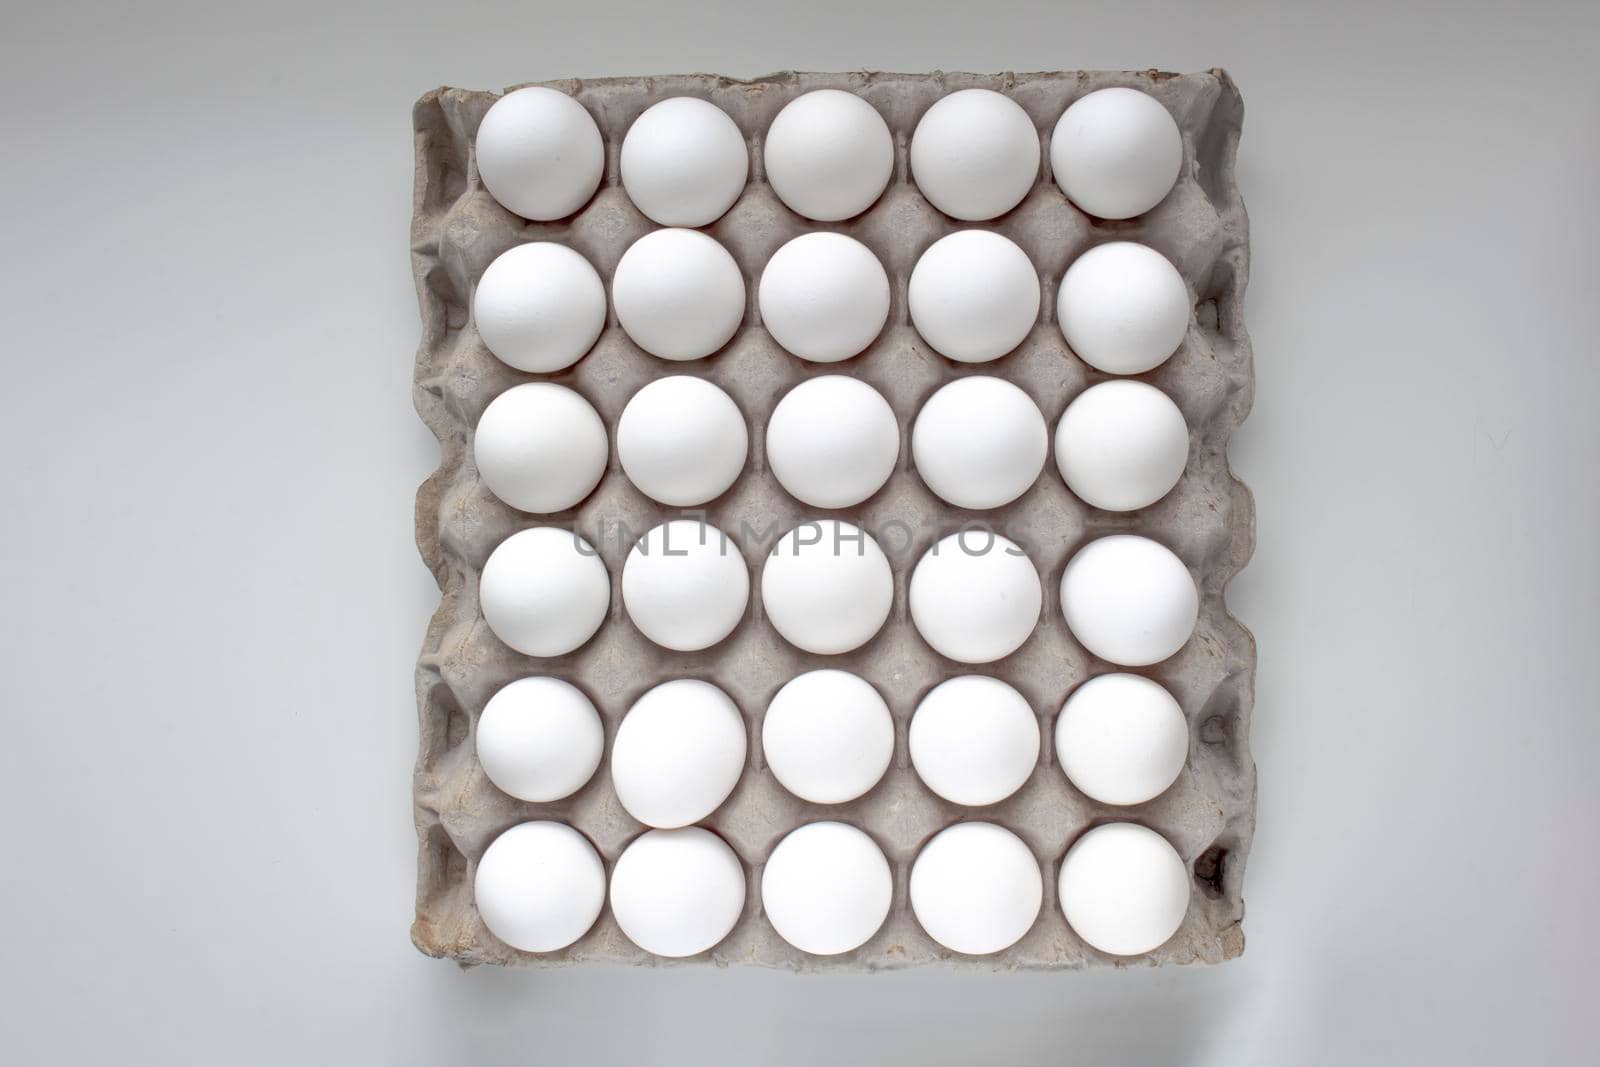 Top view of a Package Cardboard Egg Holder Egg Tray with eggs by oasisamuel